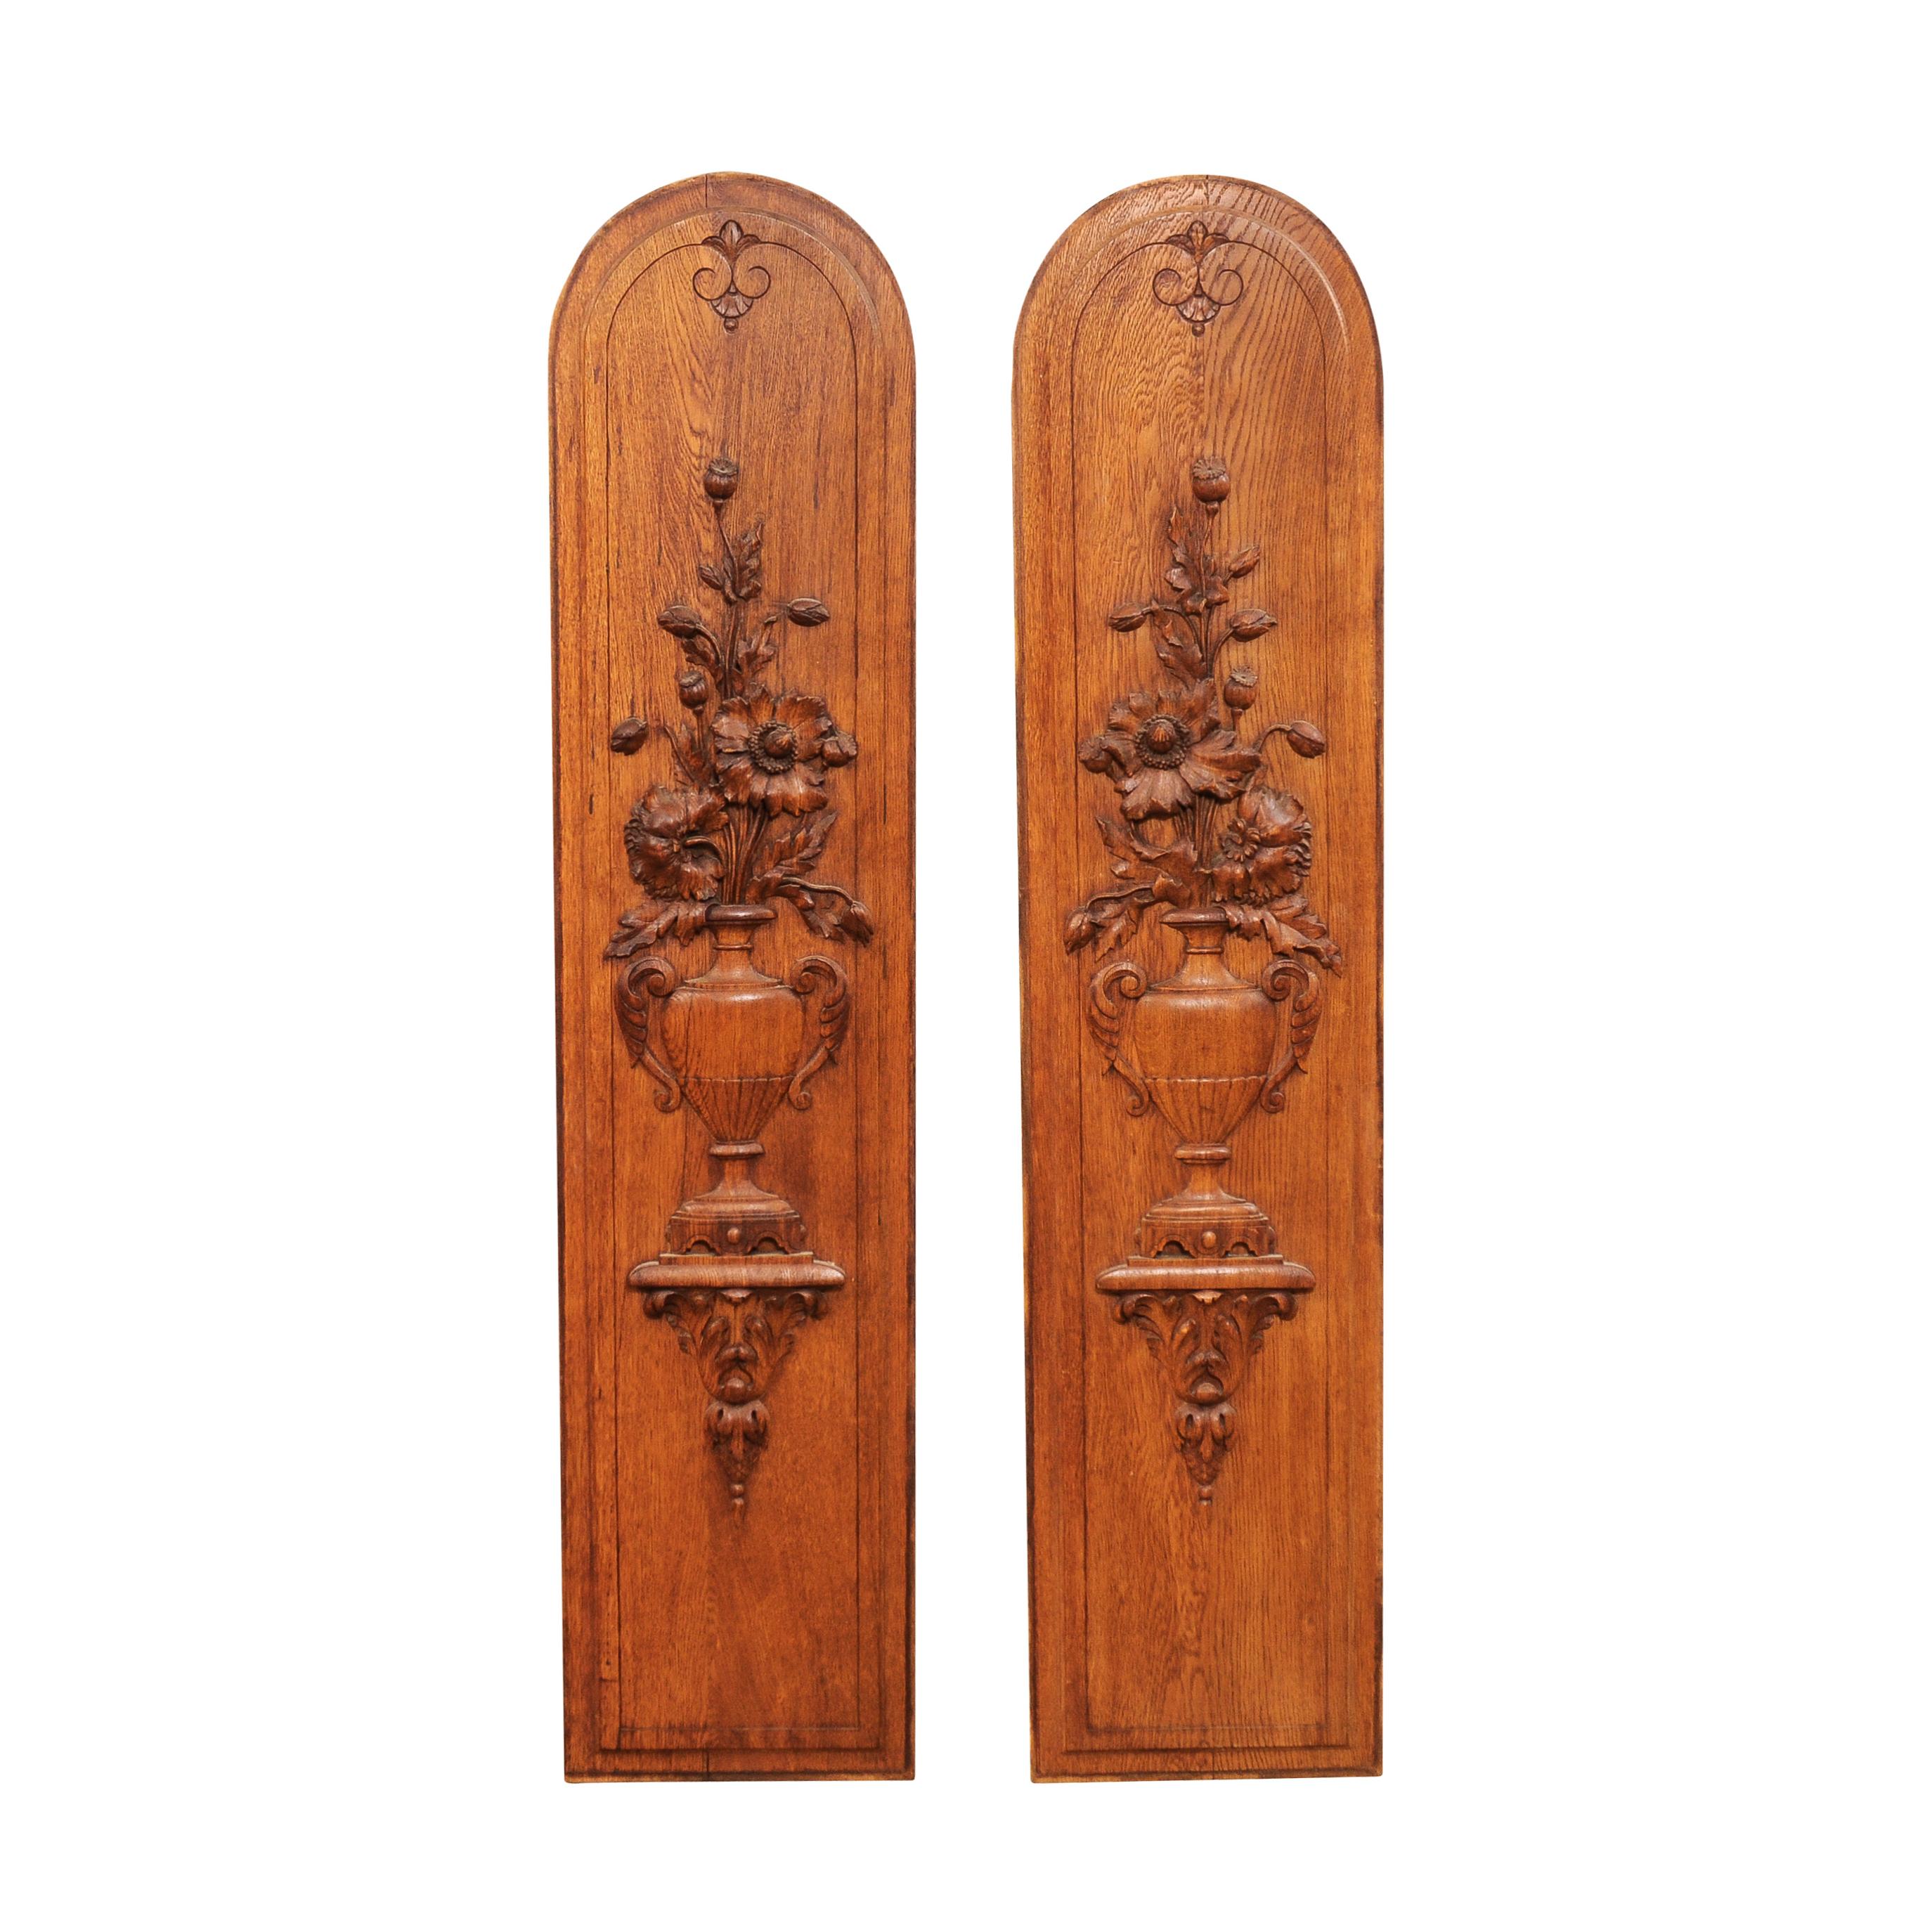 A pair of French oak vertical decorative panels from the 19th century with carved bouquets in vases. Enhance your interior with this stunning pair of French oak vertical decorative panels from the 19th century. These exquisite panels are a testament